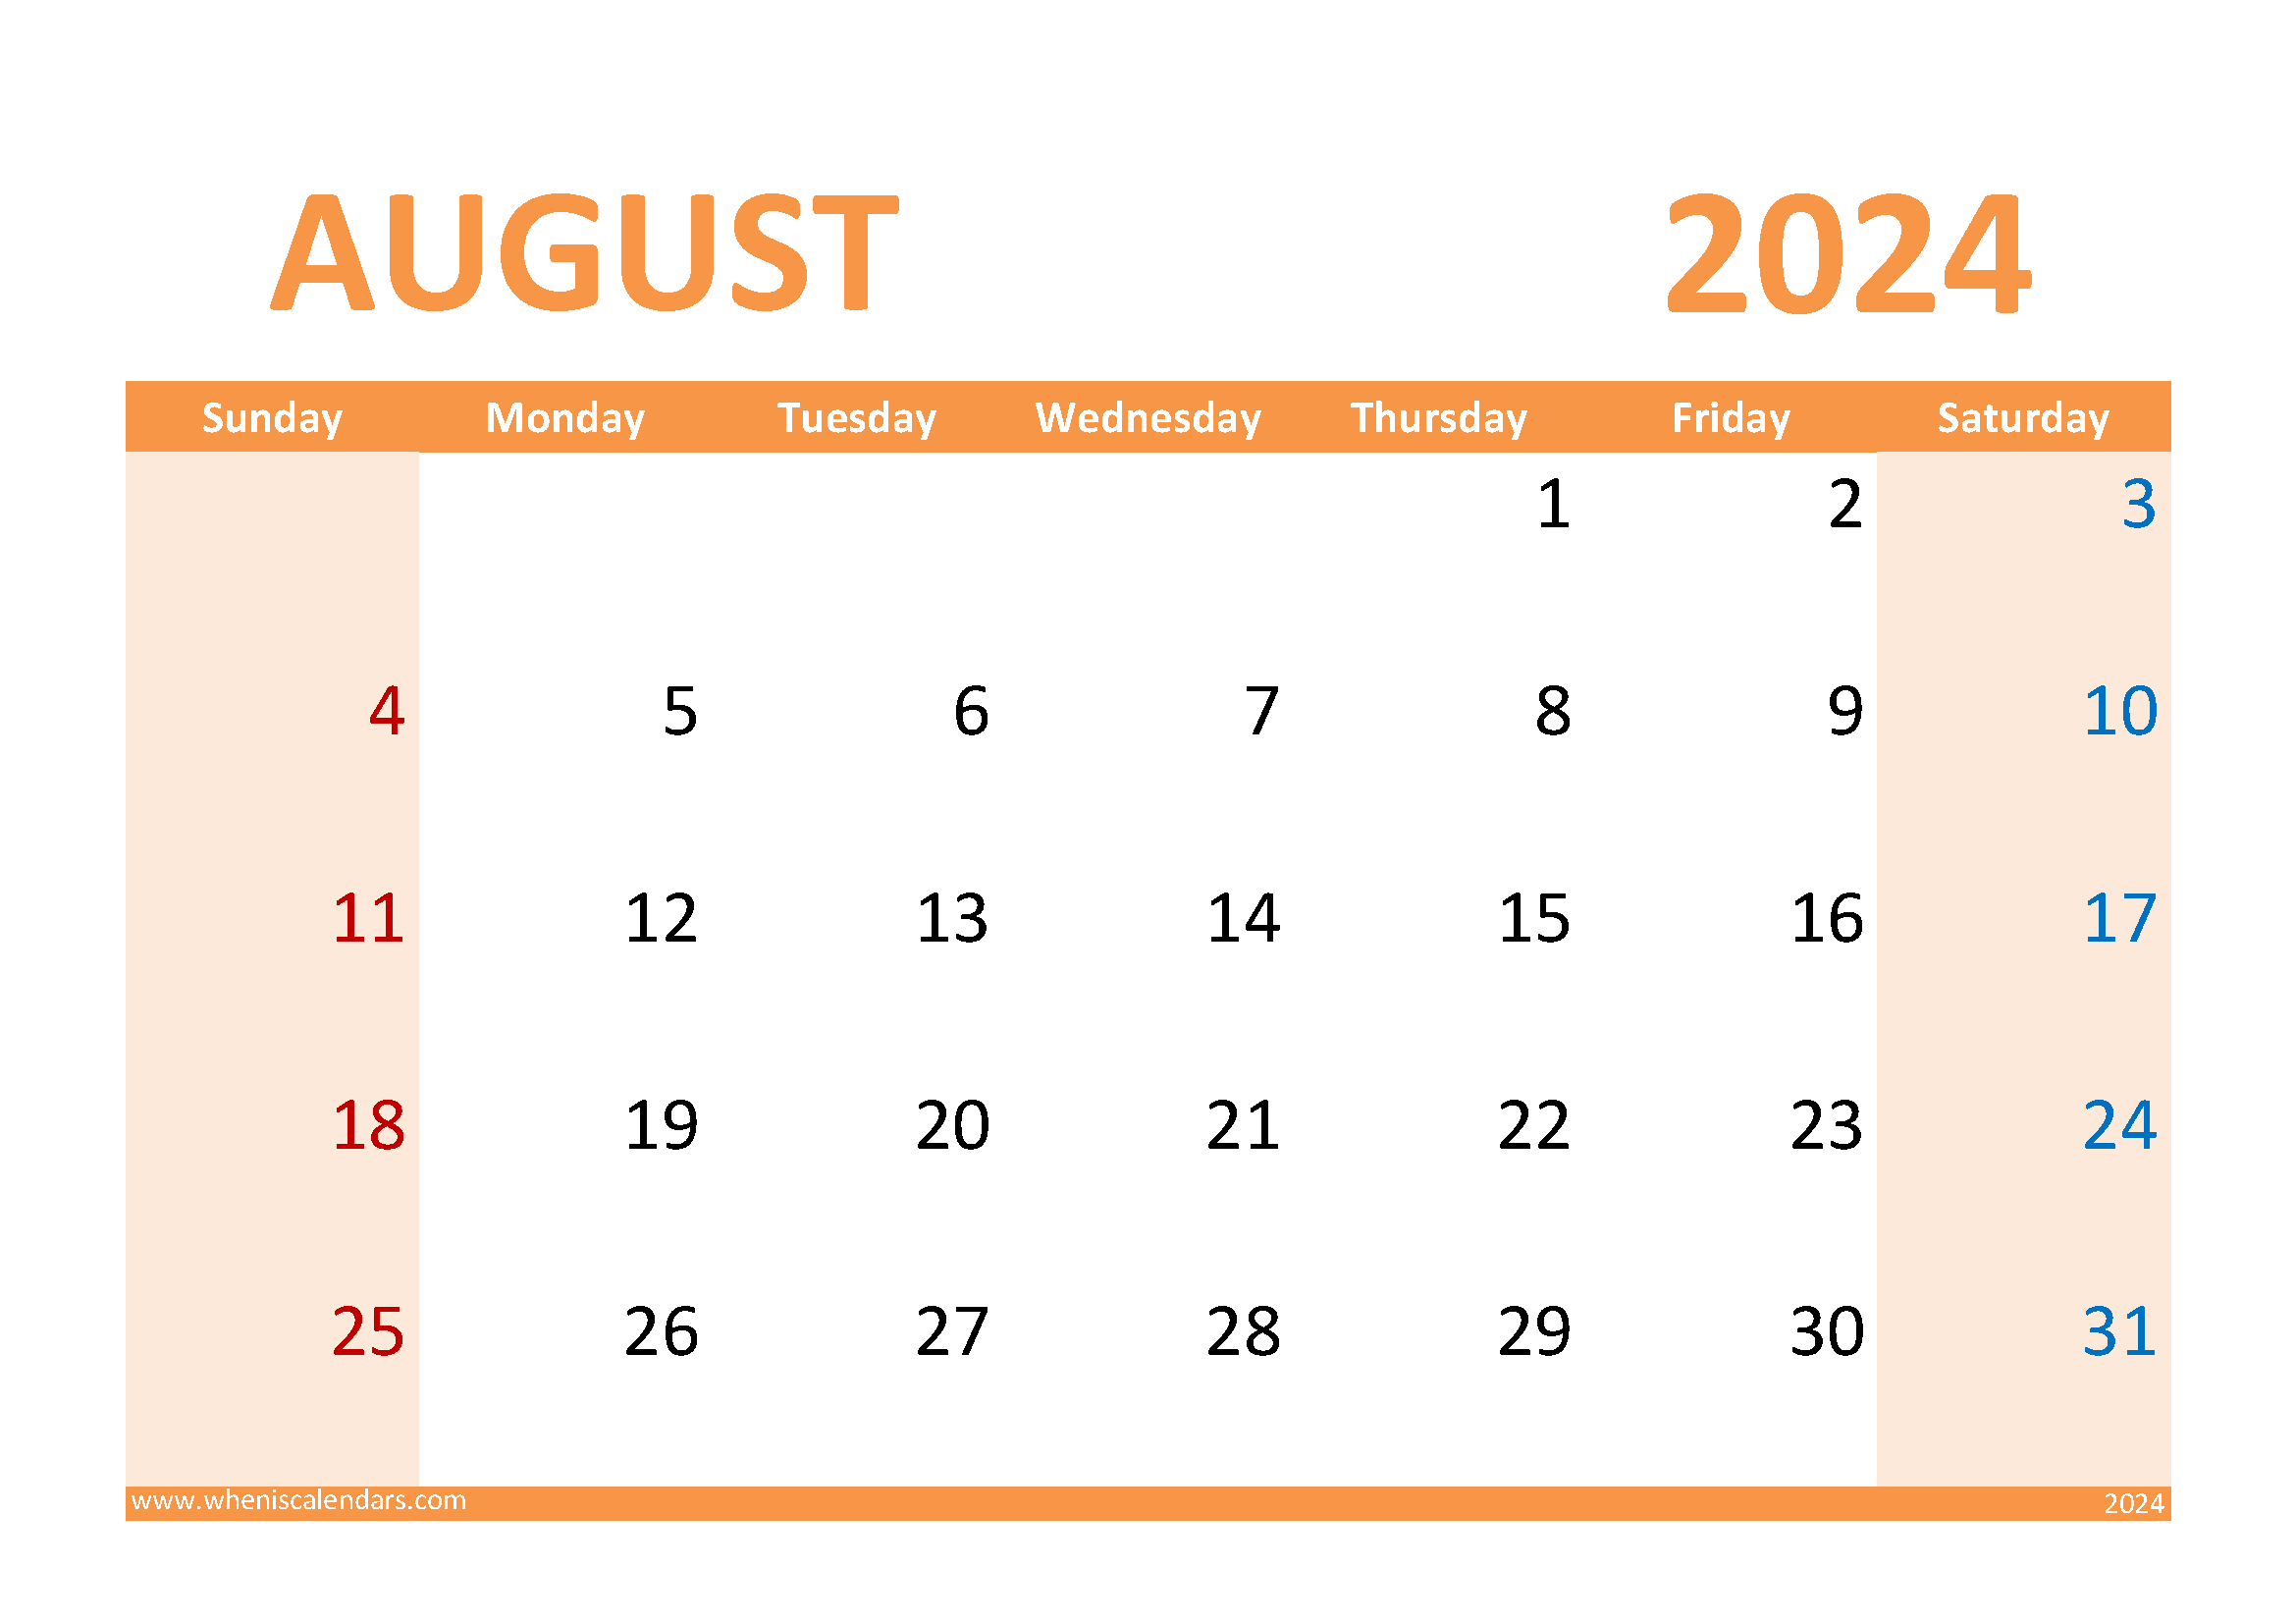 August 2024 Holidays and Special Days